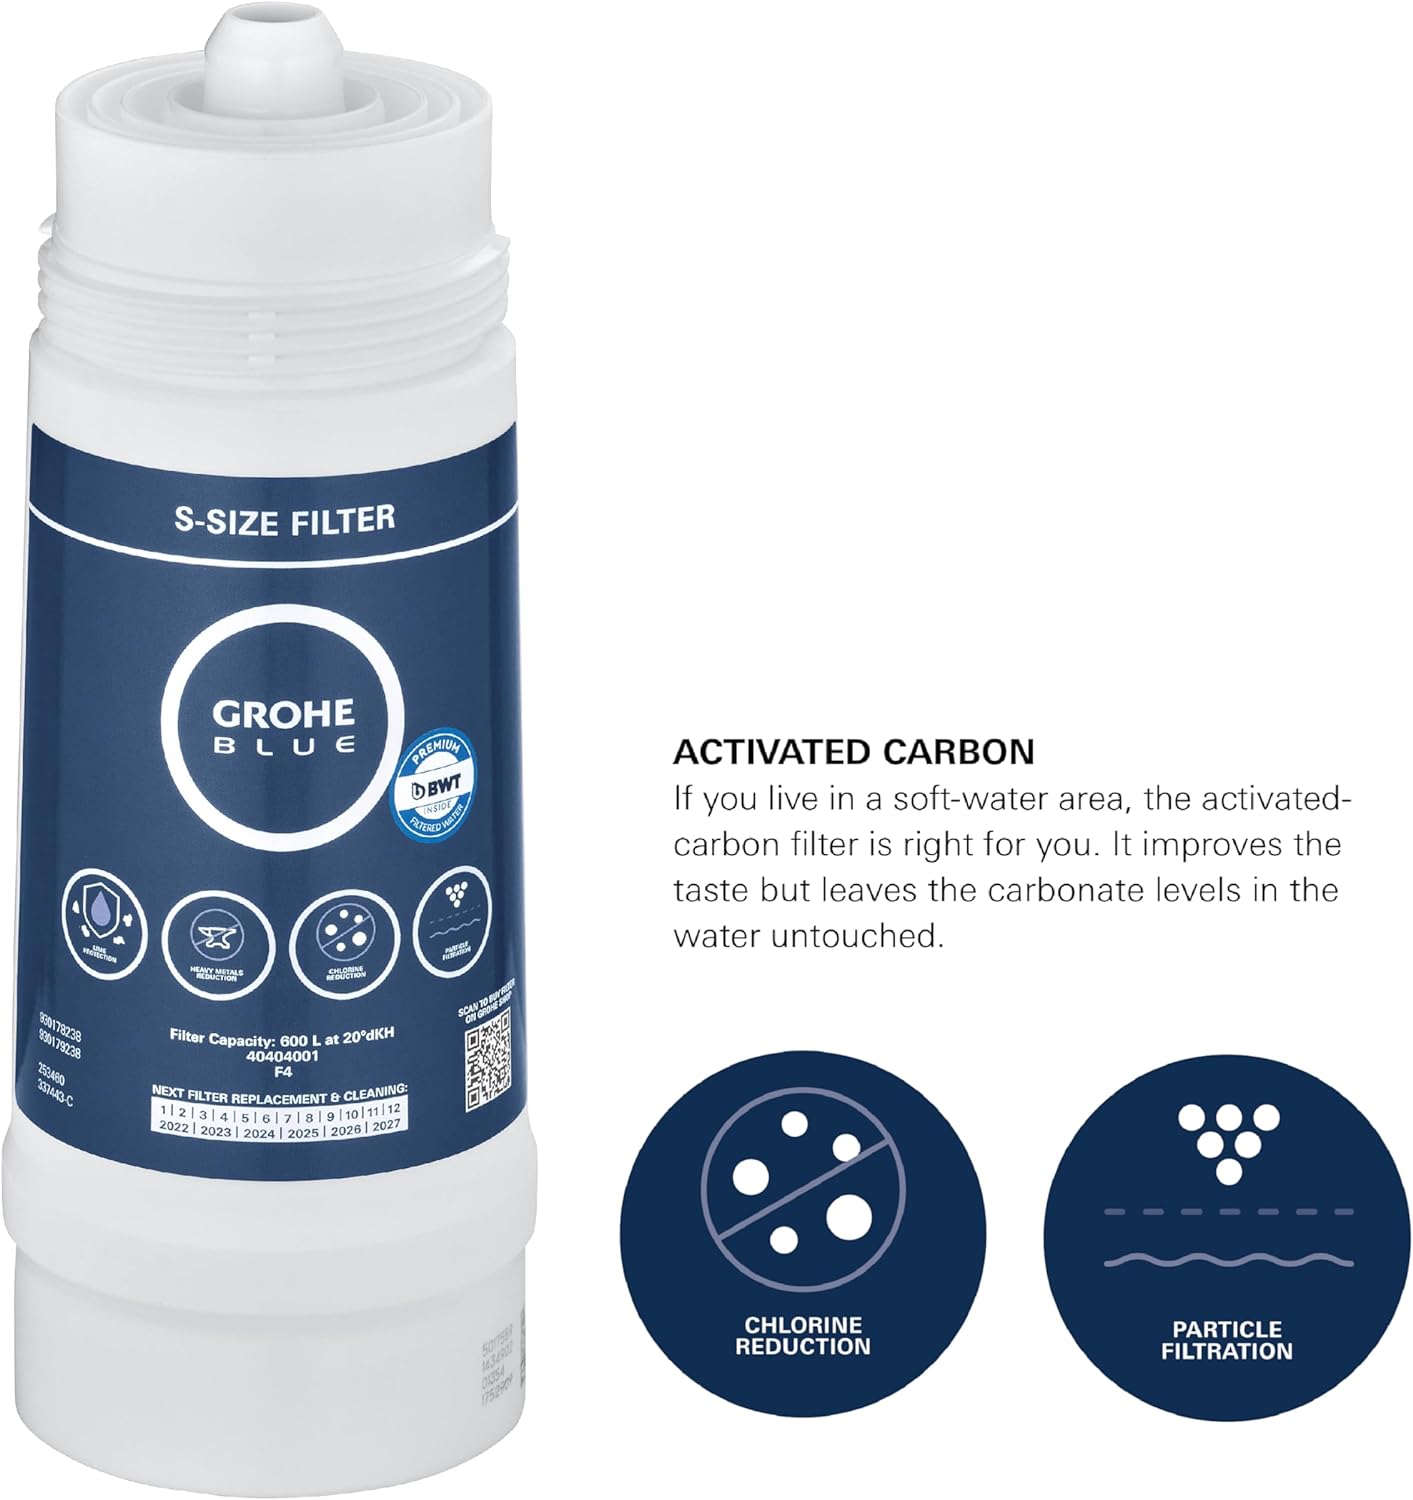 GROHE Blue Filter Cartridge - Replacement Filter for GROHE Blue and GROHE Red Water Systems for Fresh Filtered Water - A4068